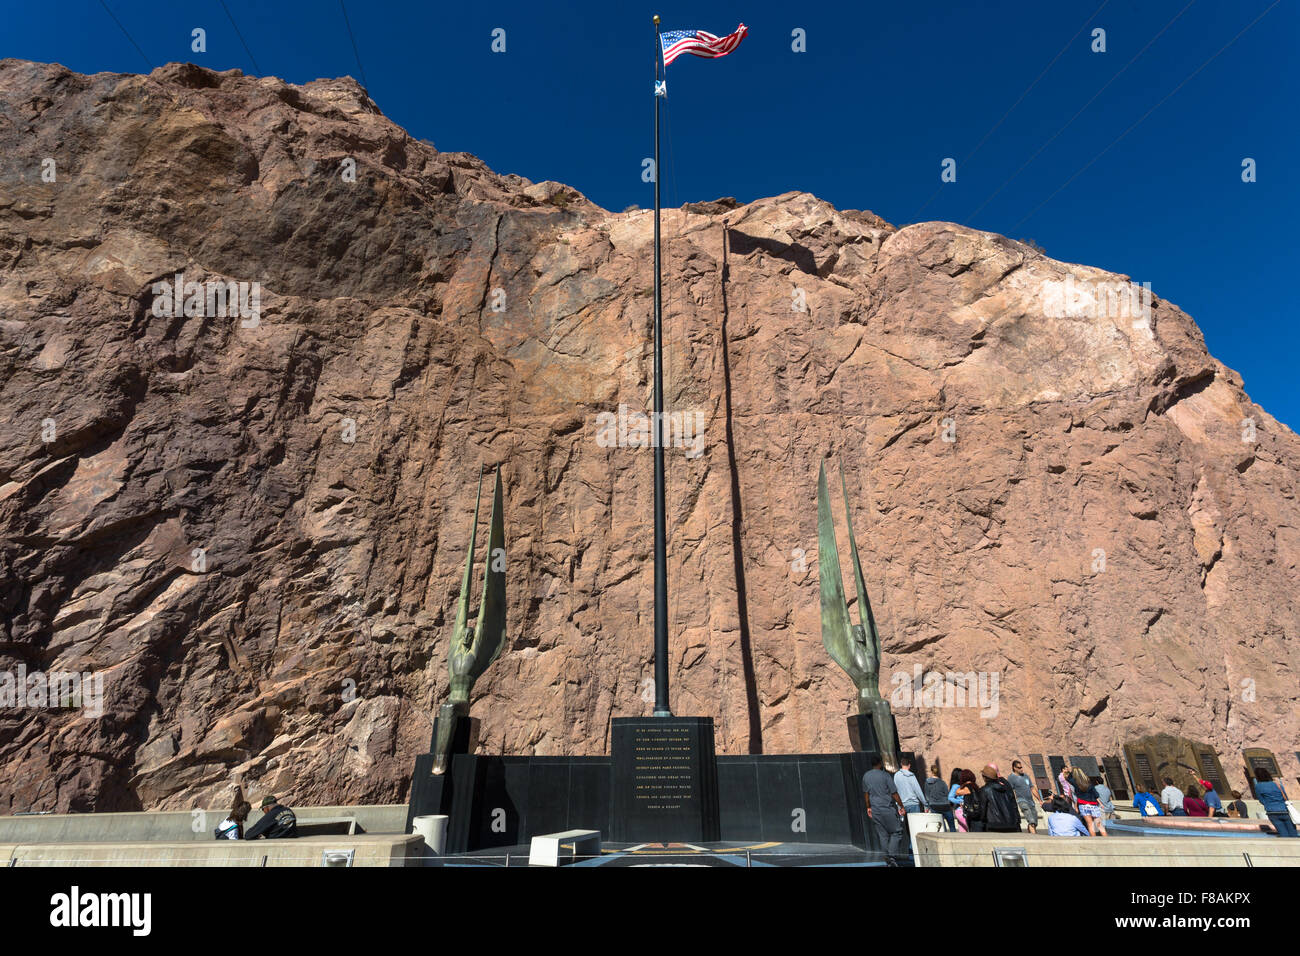 Hoover Dam miner memorial and winged Figures of the Republic against rocky background - Boulder City, NV Stock Photo